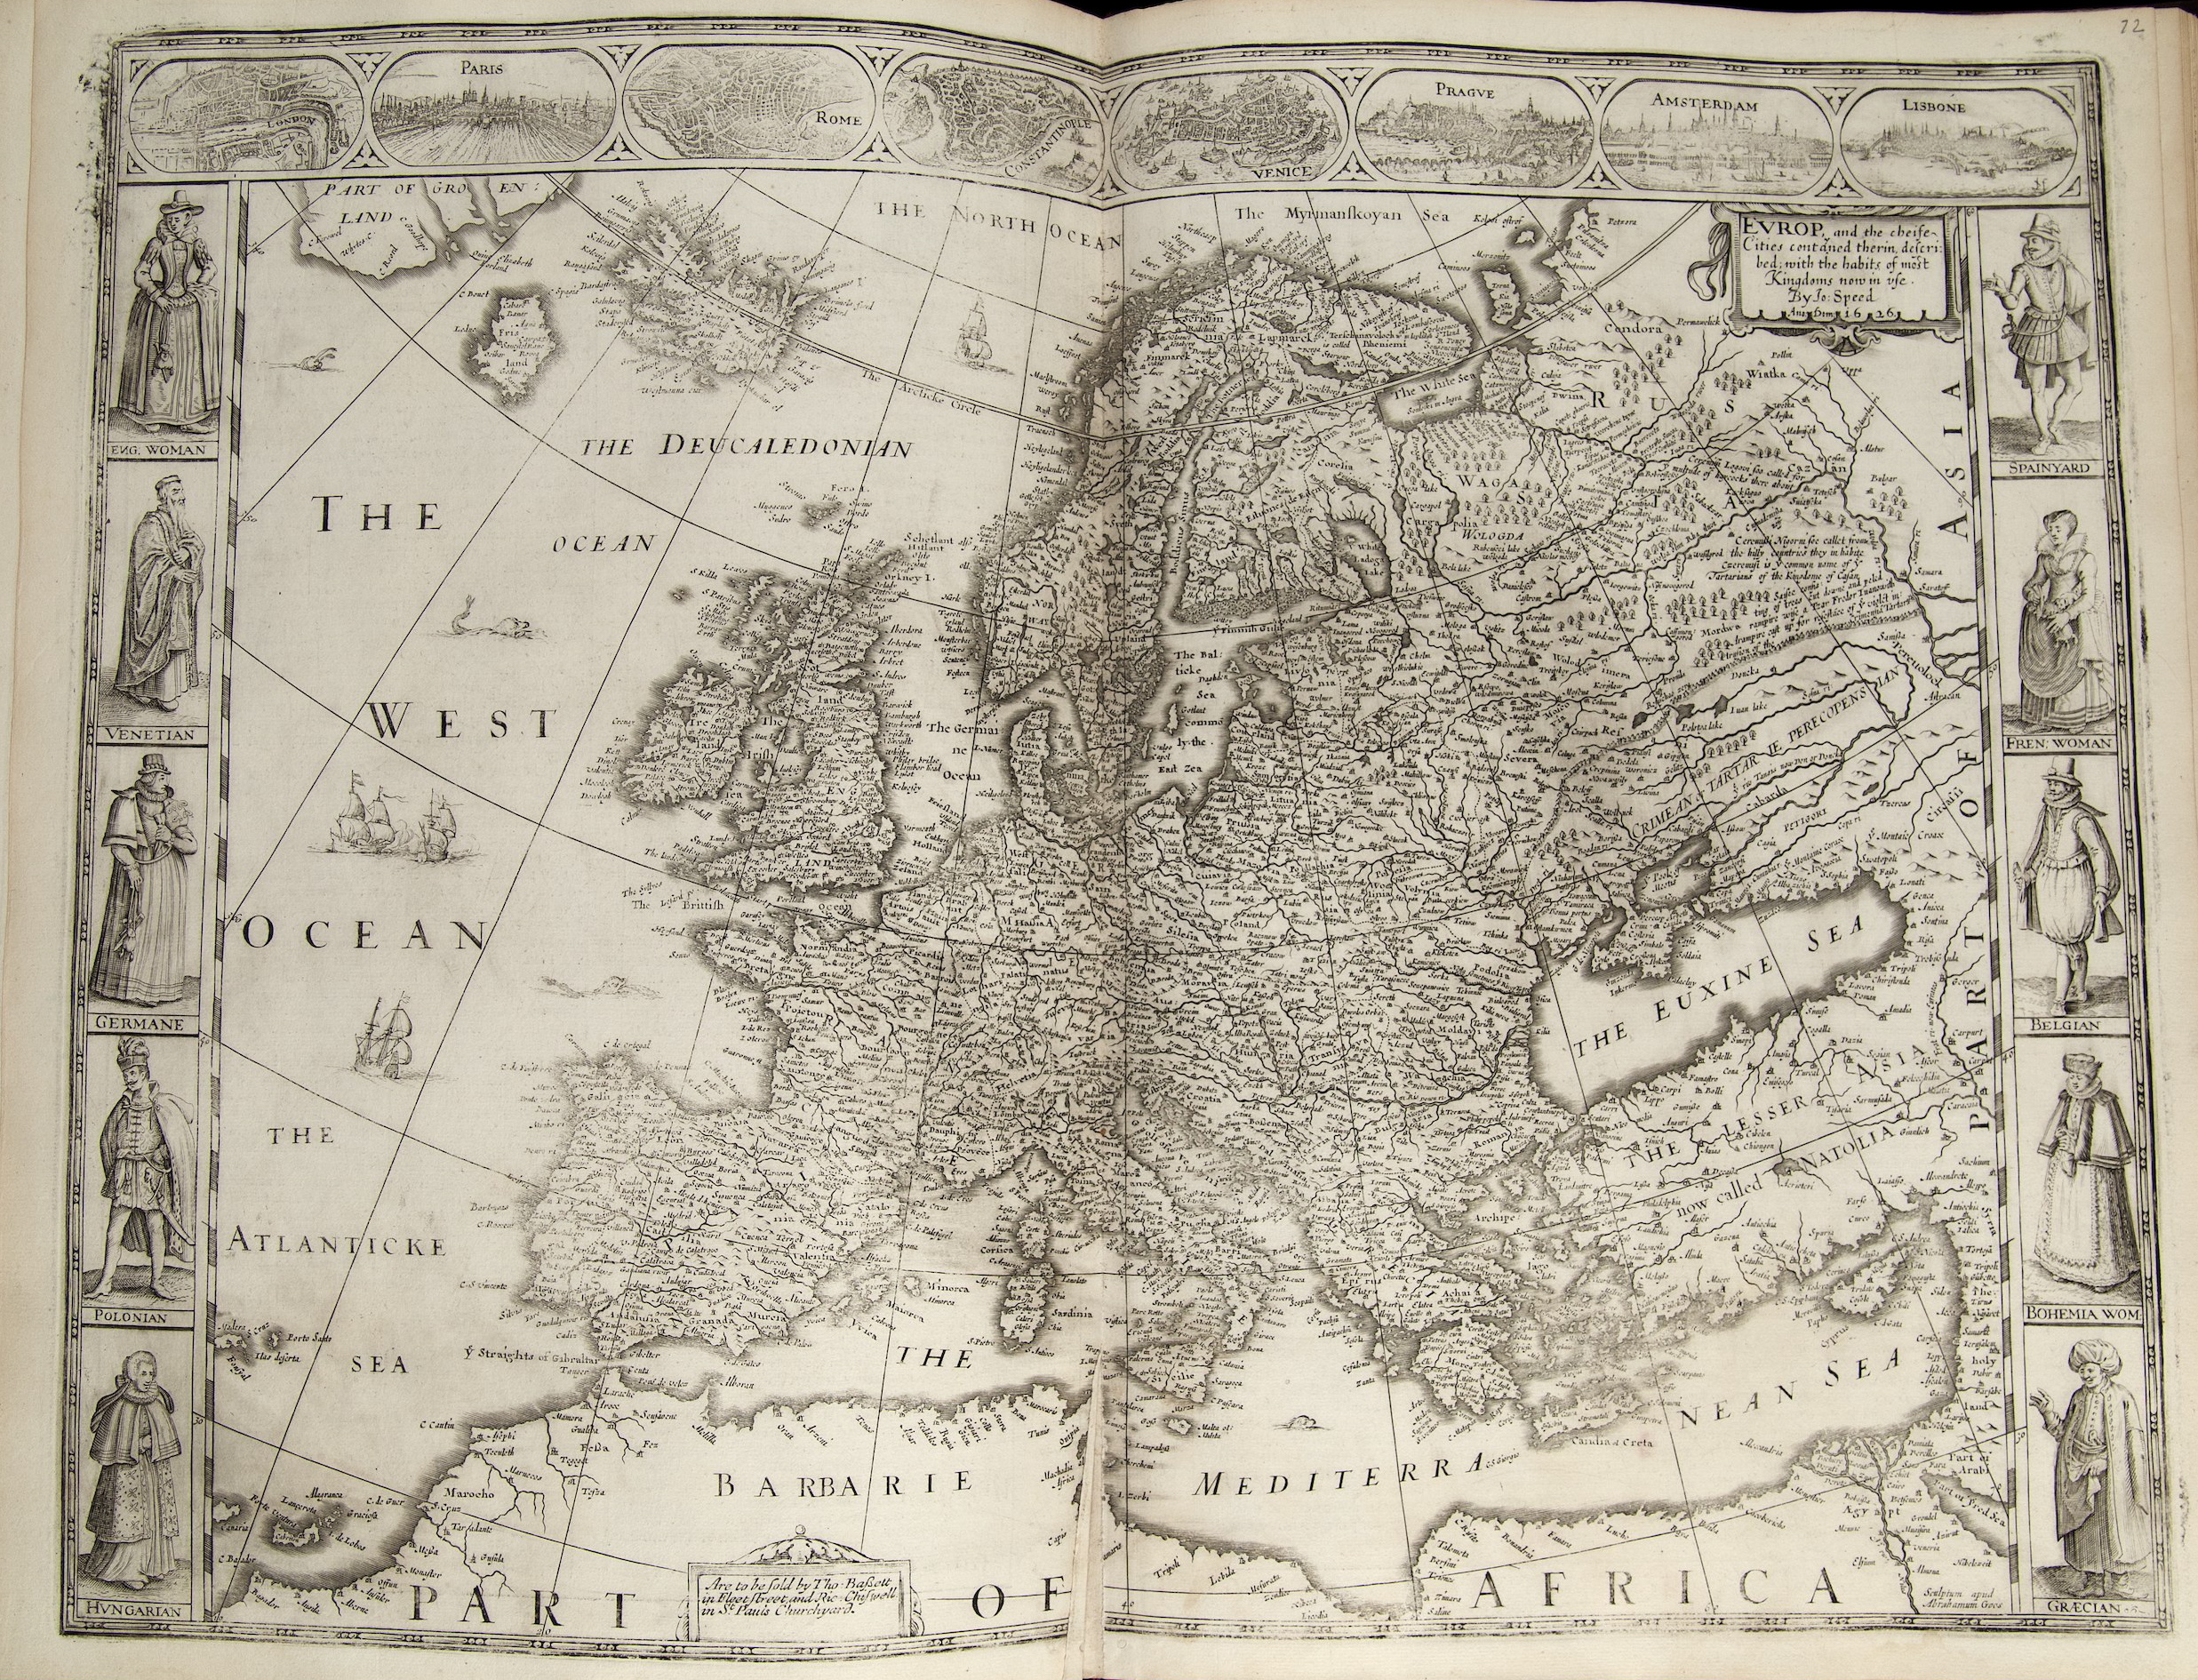 17th century map of Europe, bordered with images of men and women of various stations.